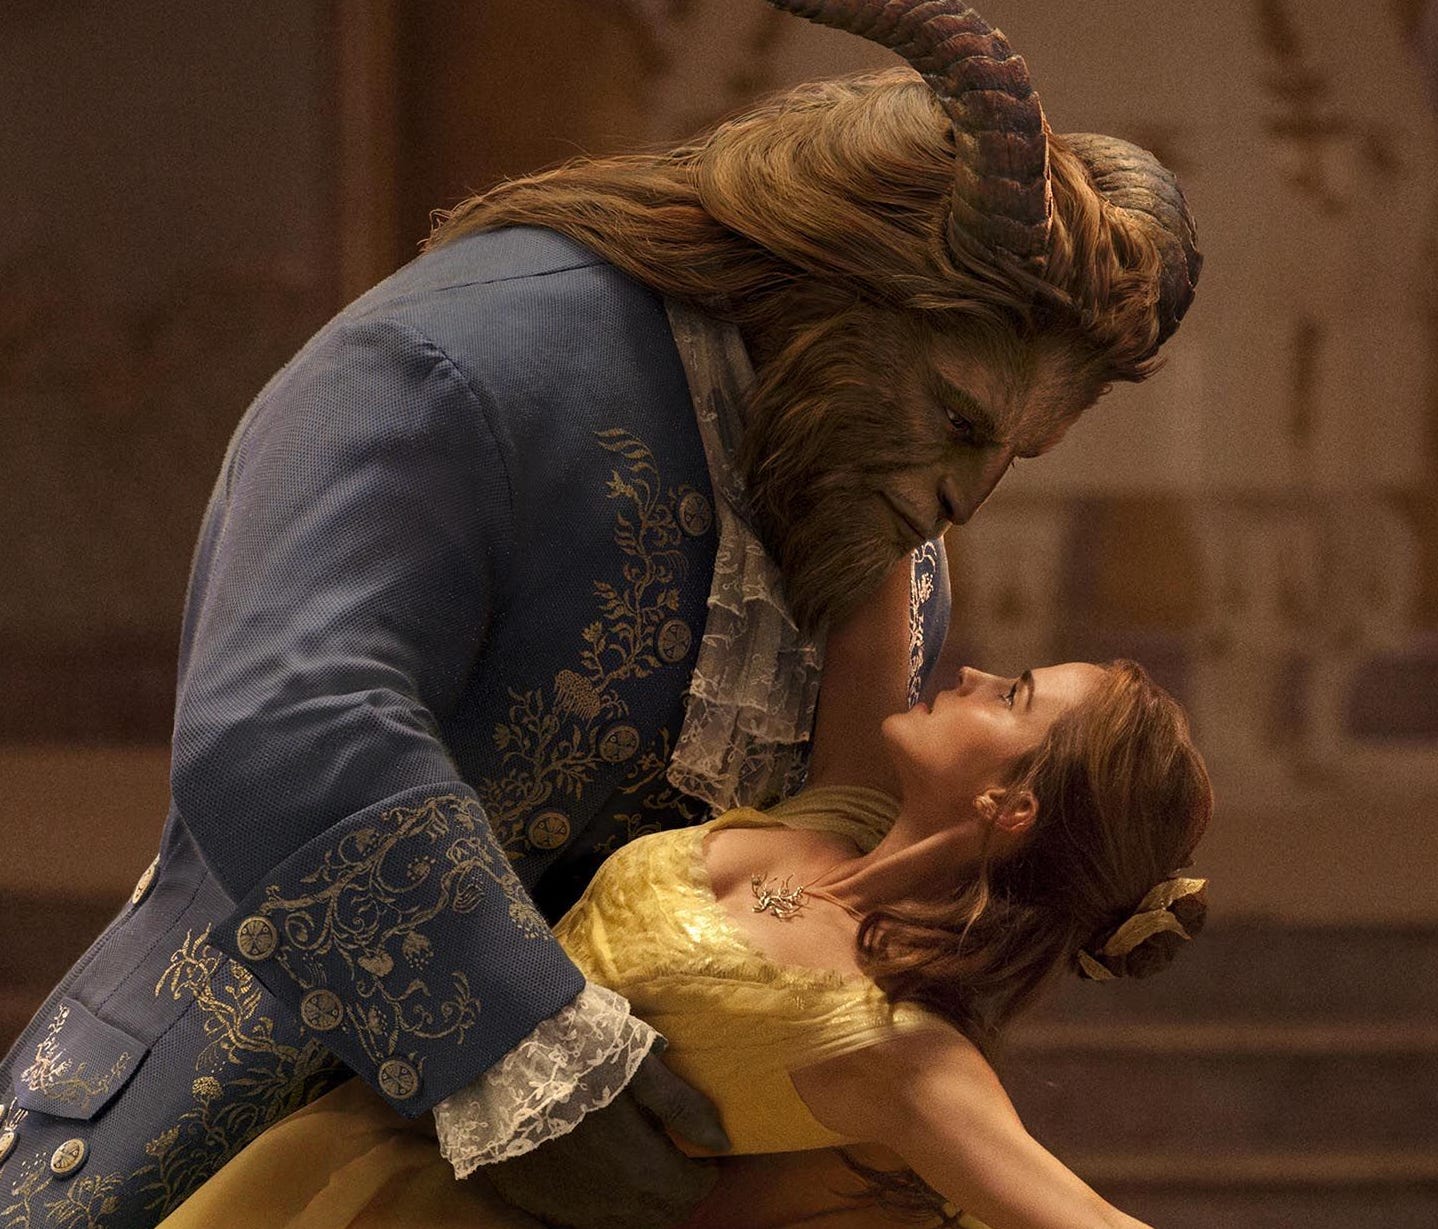 A two-step performance capture turned Dan Stevens into a romantic hero opposite Emma Watson in 'Beauty and the Beast.'